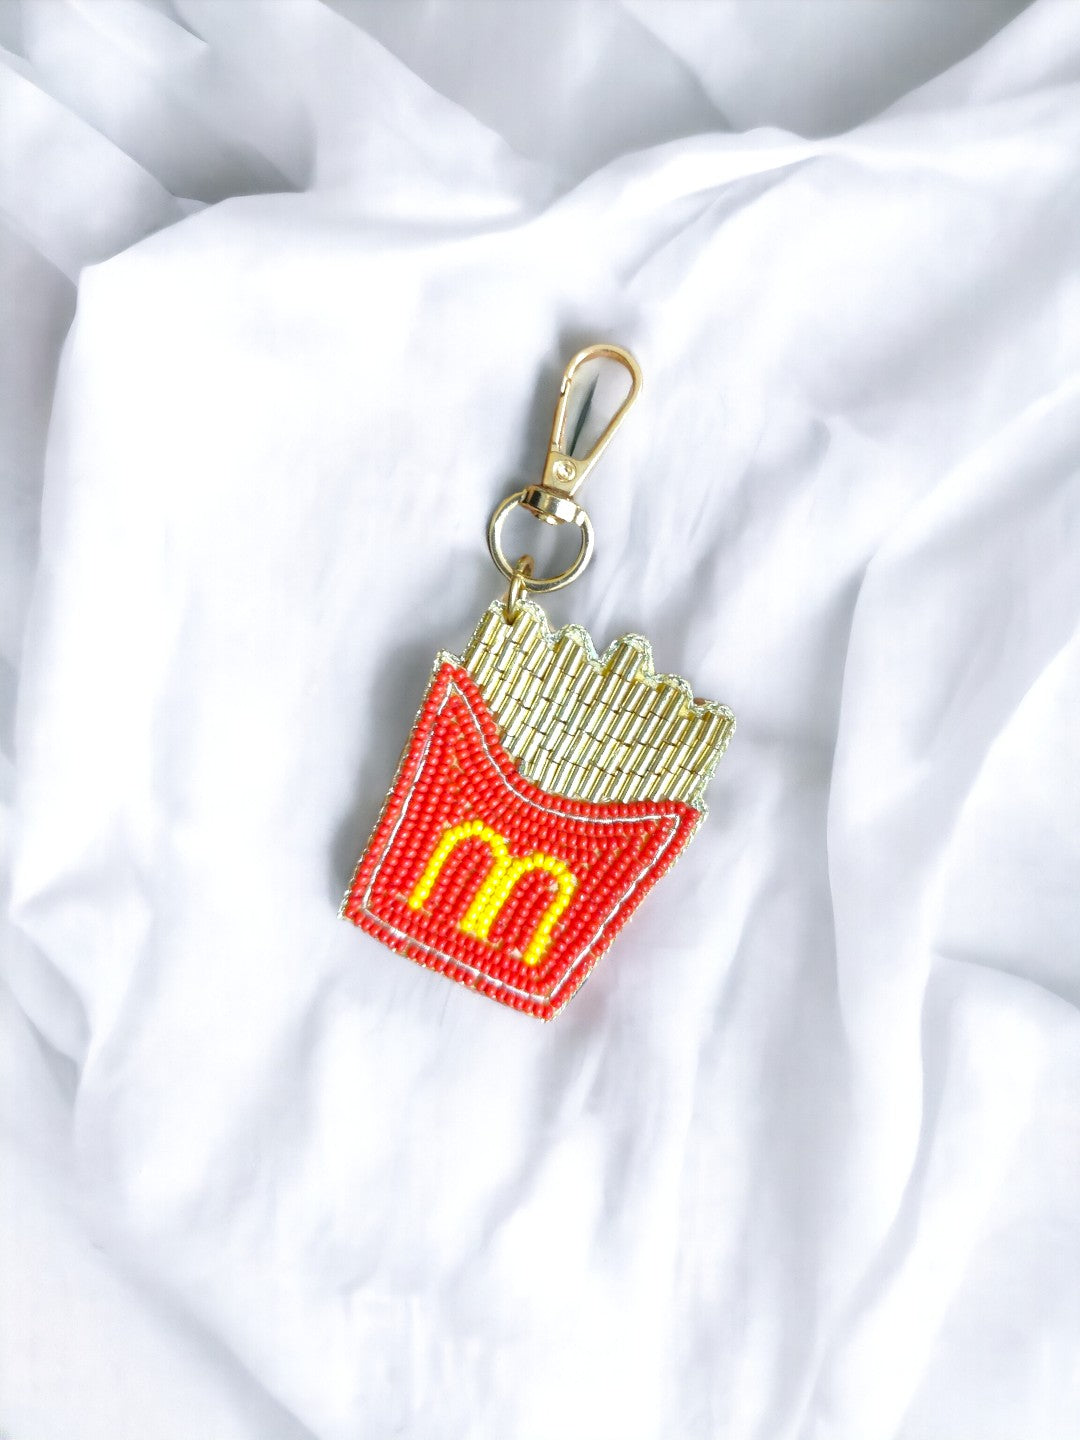 Introducing the latest must-have accessory for any true MCDonald's aficionado: the MCD Fries bag charm! 